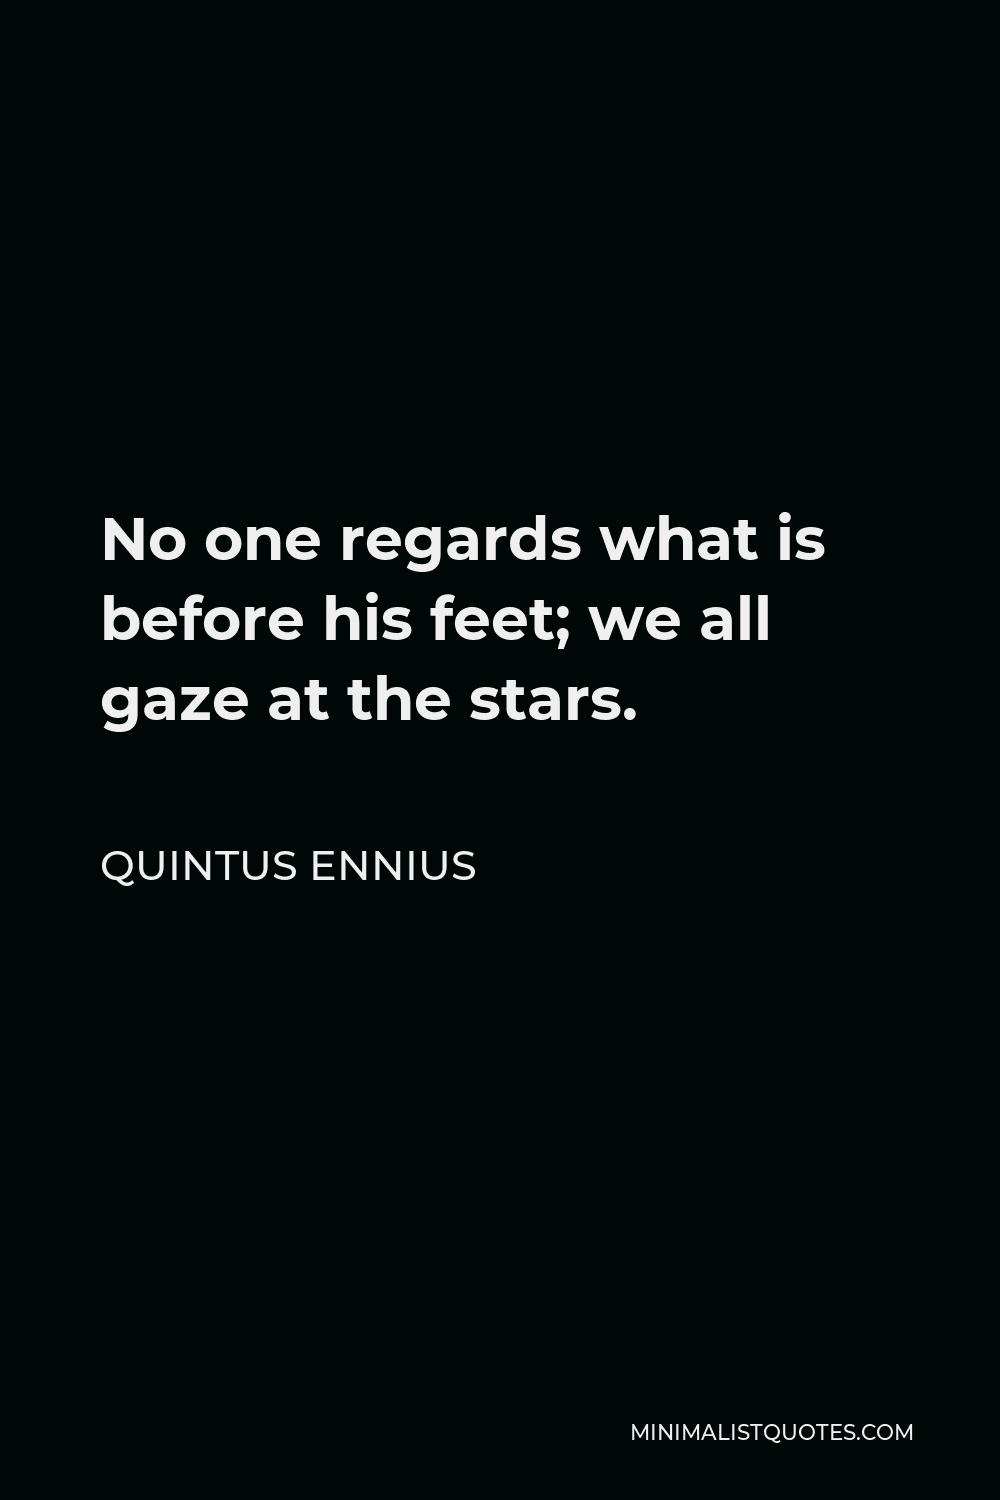 Quintus Ennius Quote - No one regards what is before his feet; we all gaze at the stars.